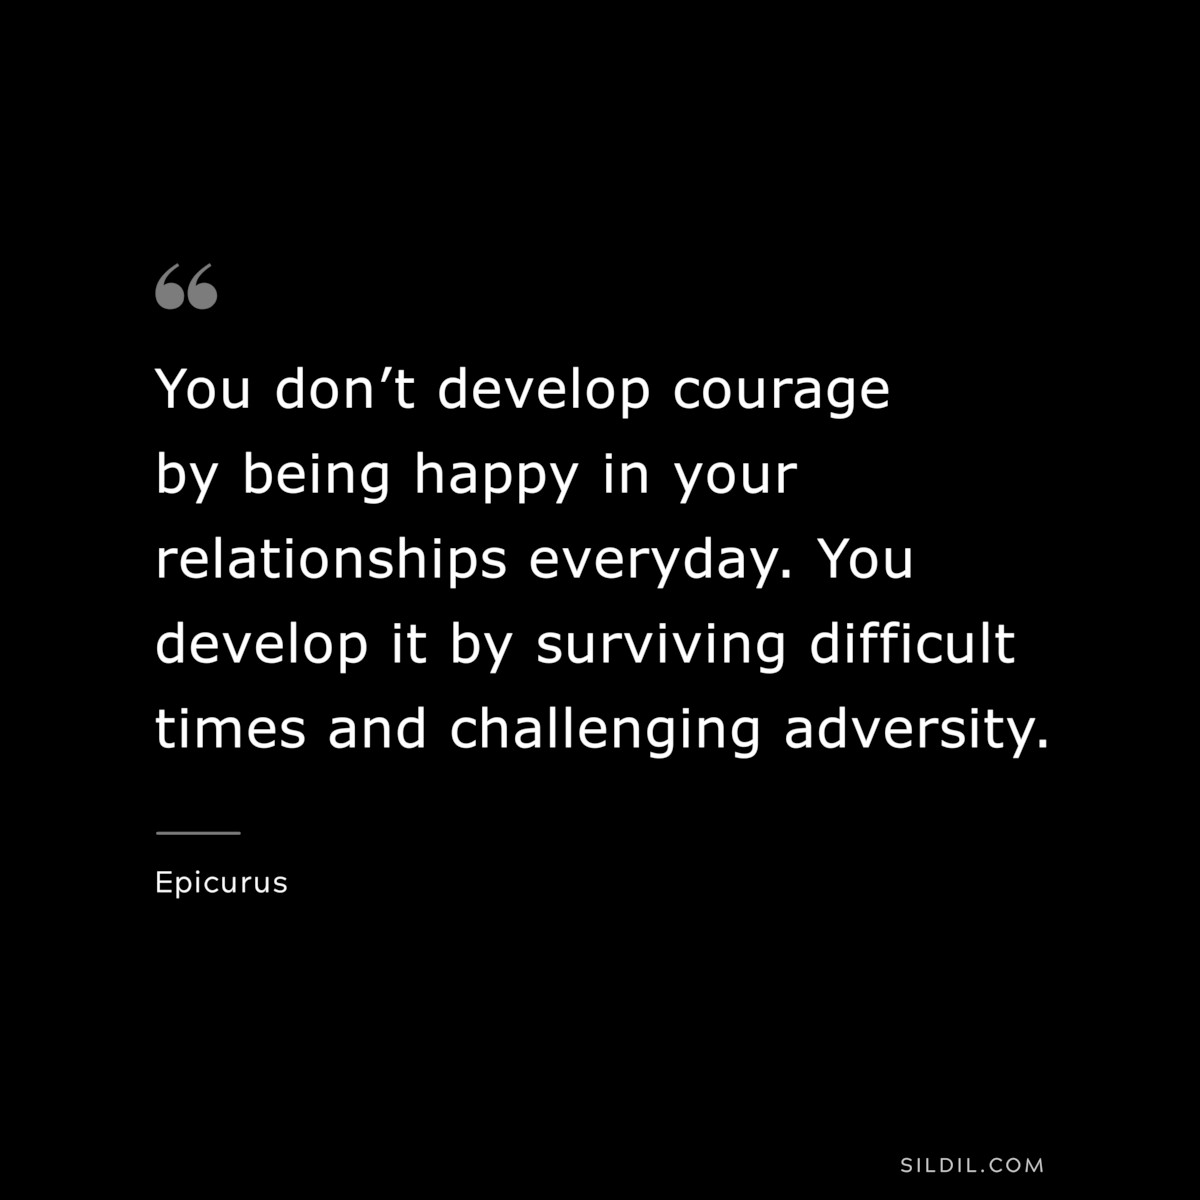 You don’t develop courage by being happy in your relationships everyday. You develop it by surviving difficult times and challenging adversity. — Epicurus